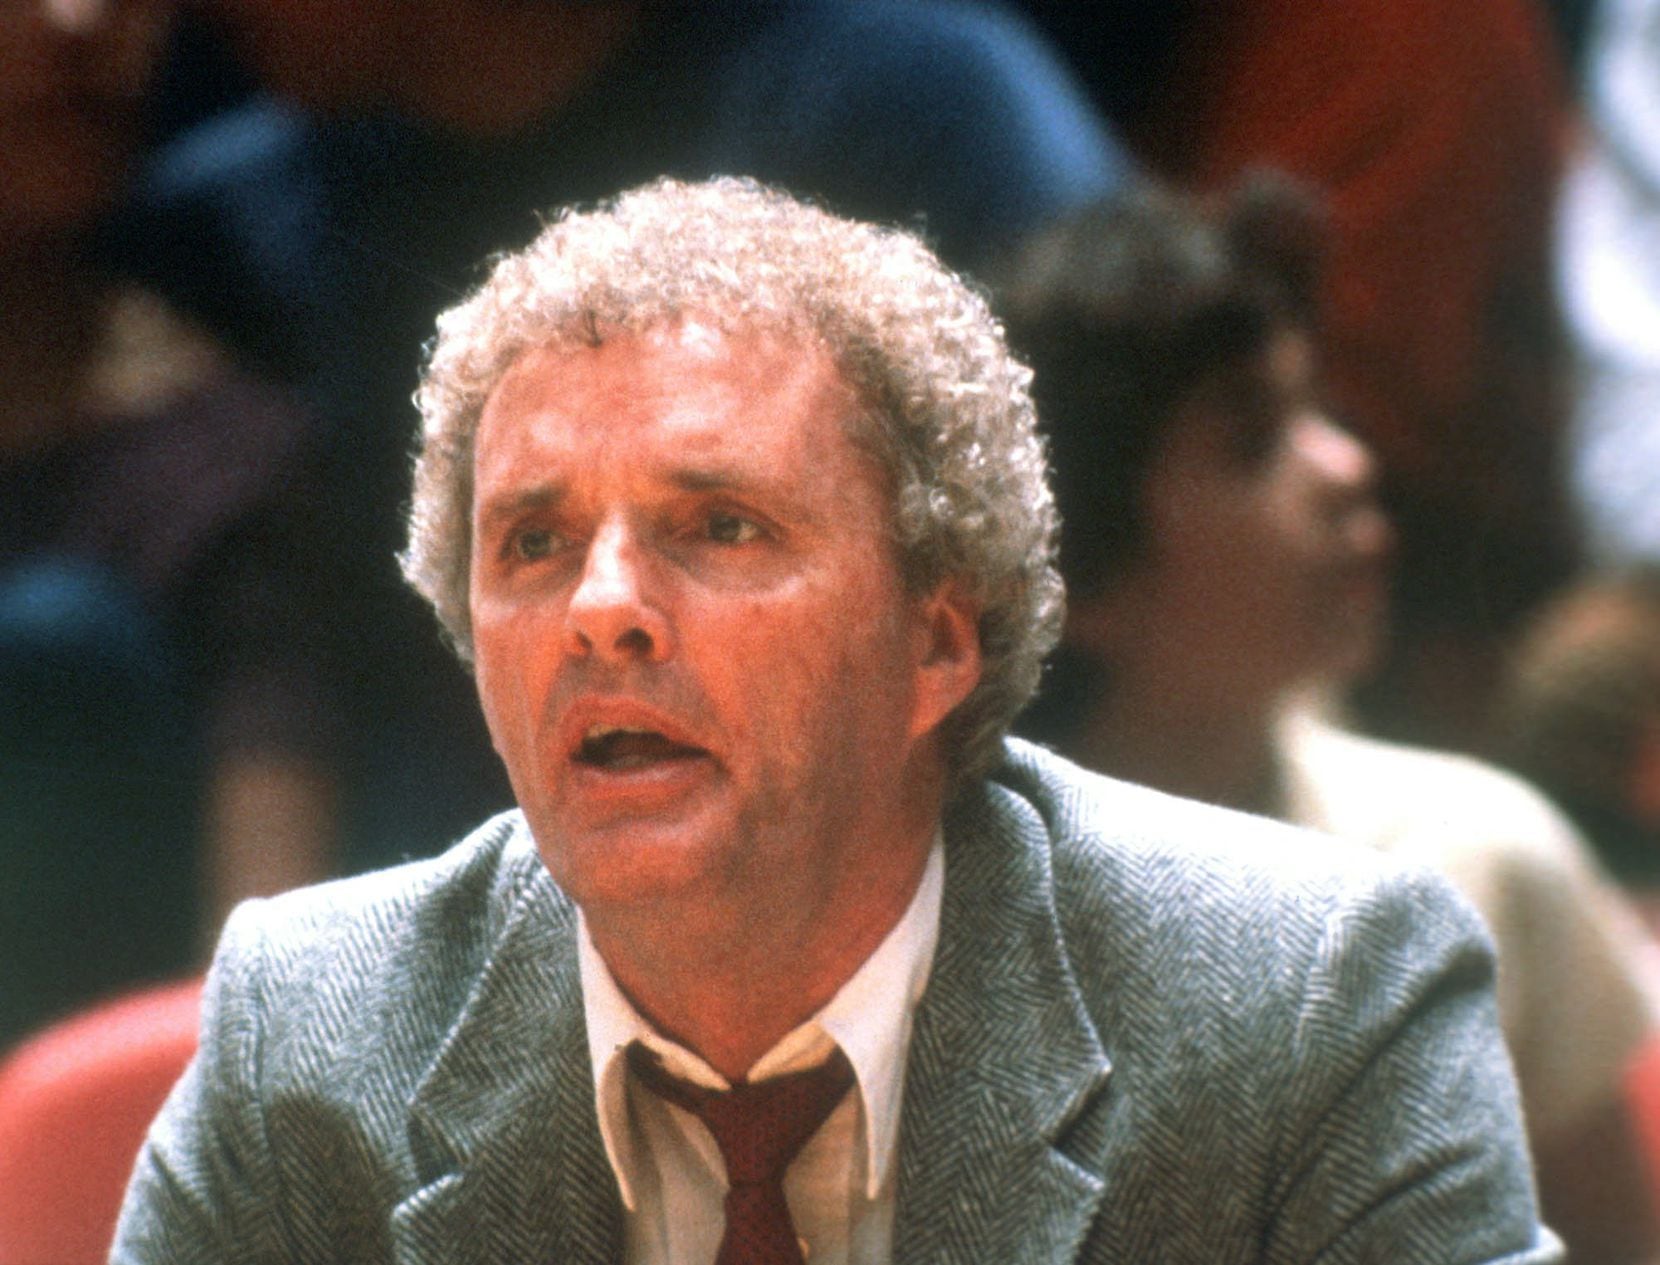 Hubie Brown pictured in a file photo from Nov. 13, 1982, when he coached the New York Knicks.